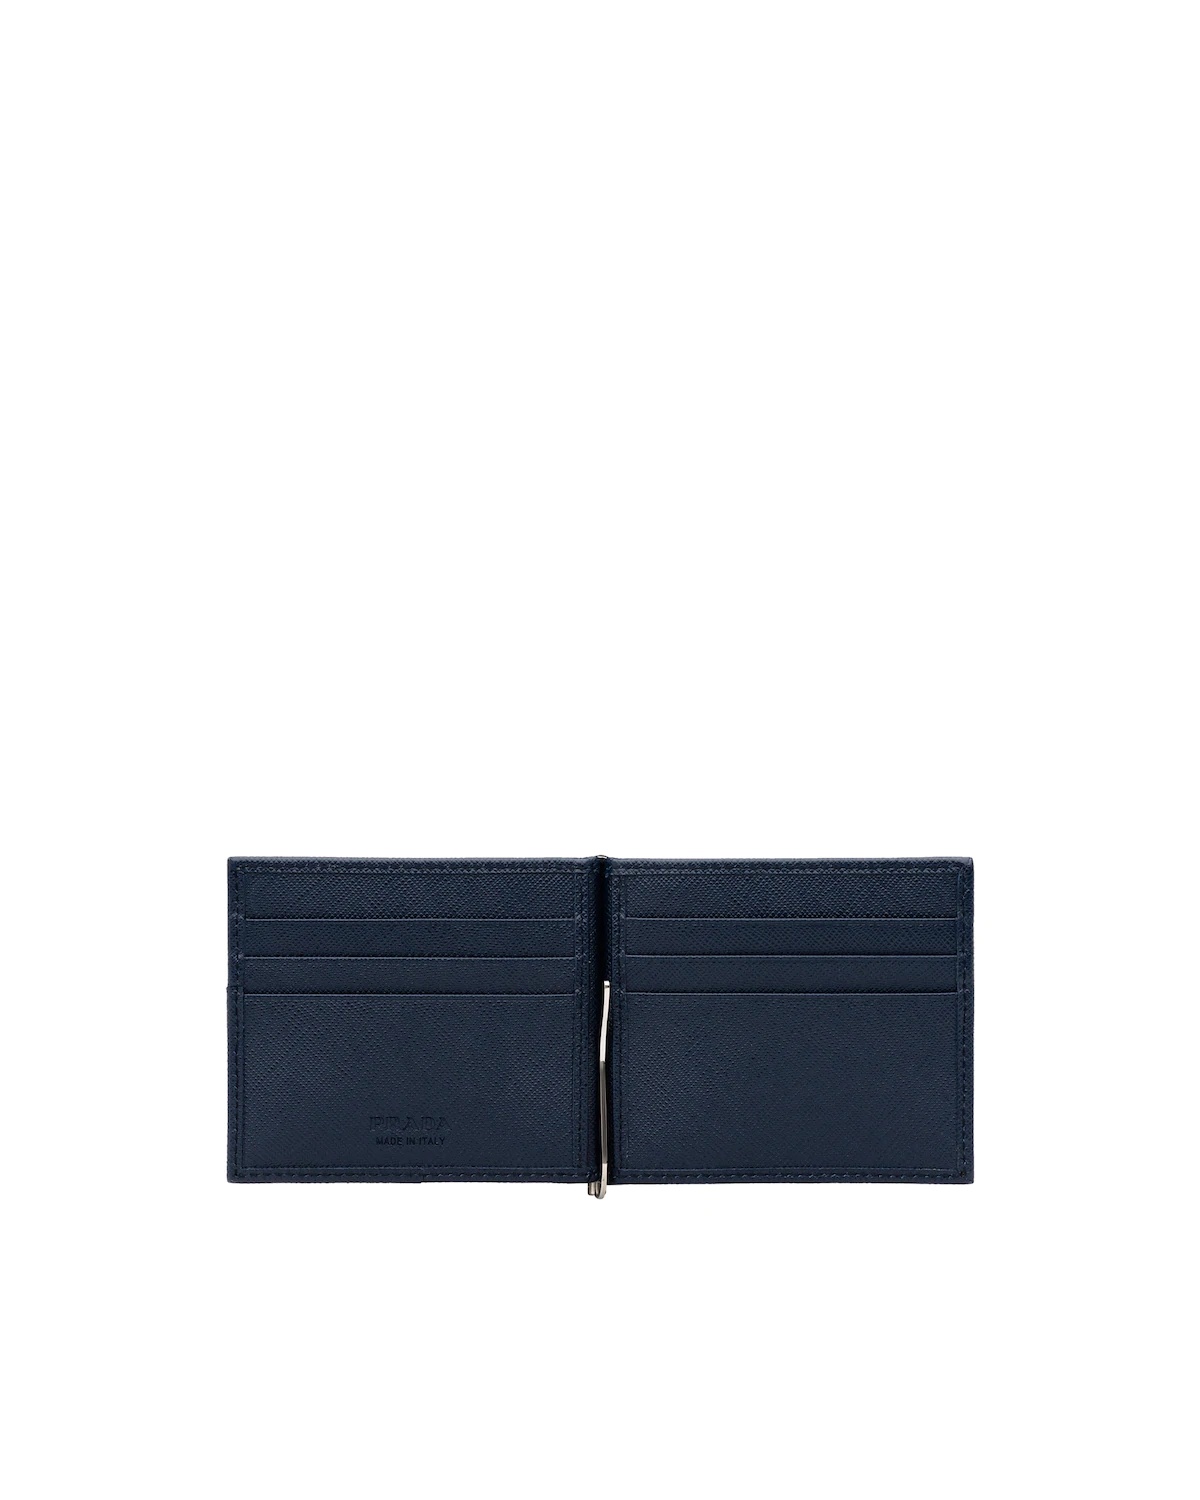 Saffiano Leather Wallet - 4